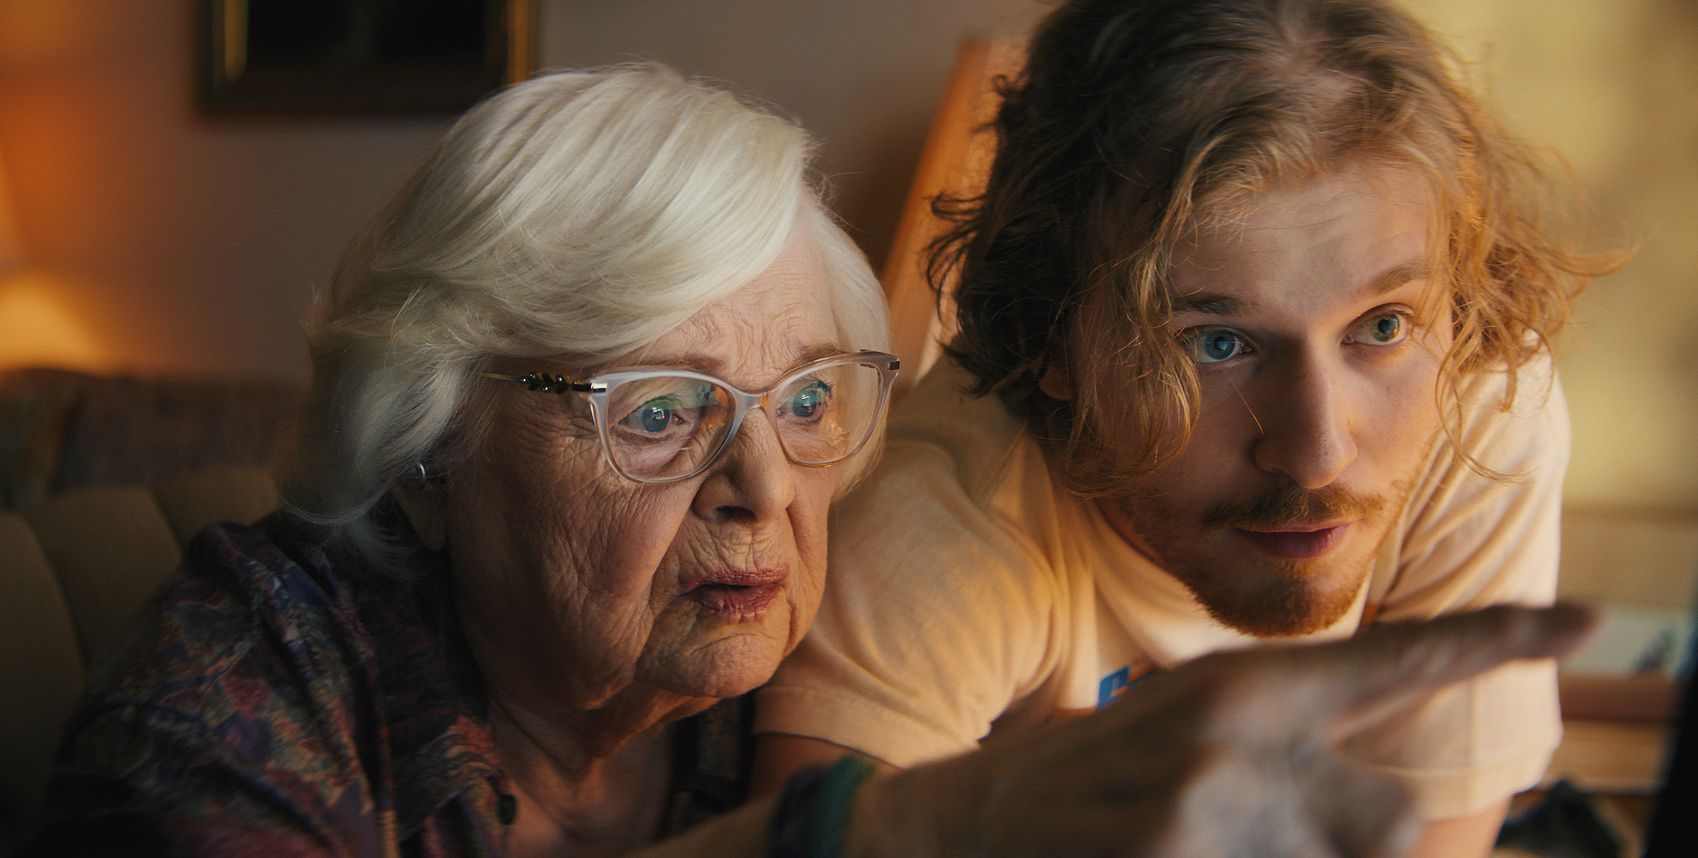 June Squibb Takes the Lead in Comedy Film Thelma at Age 94